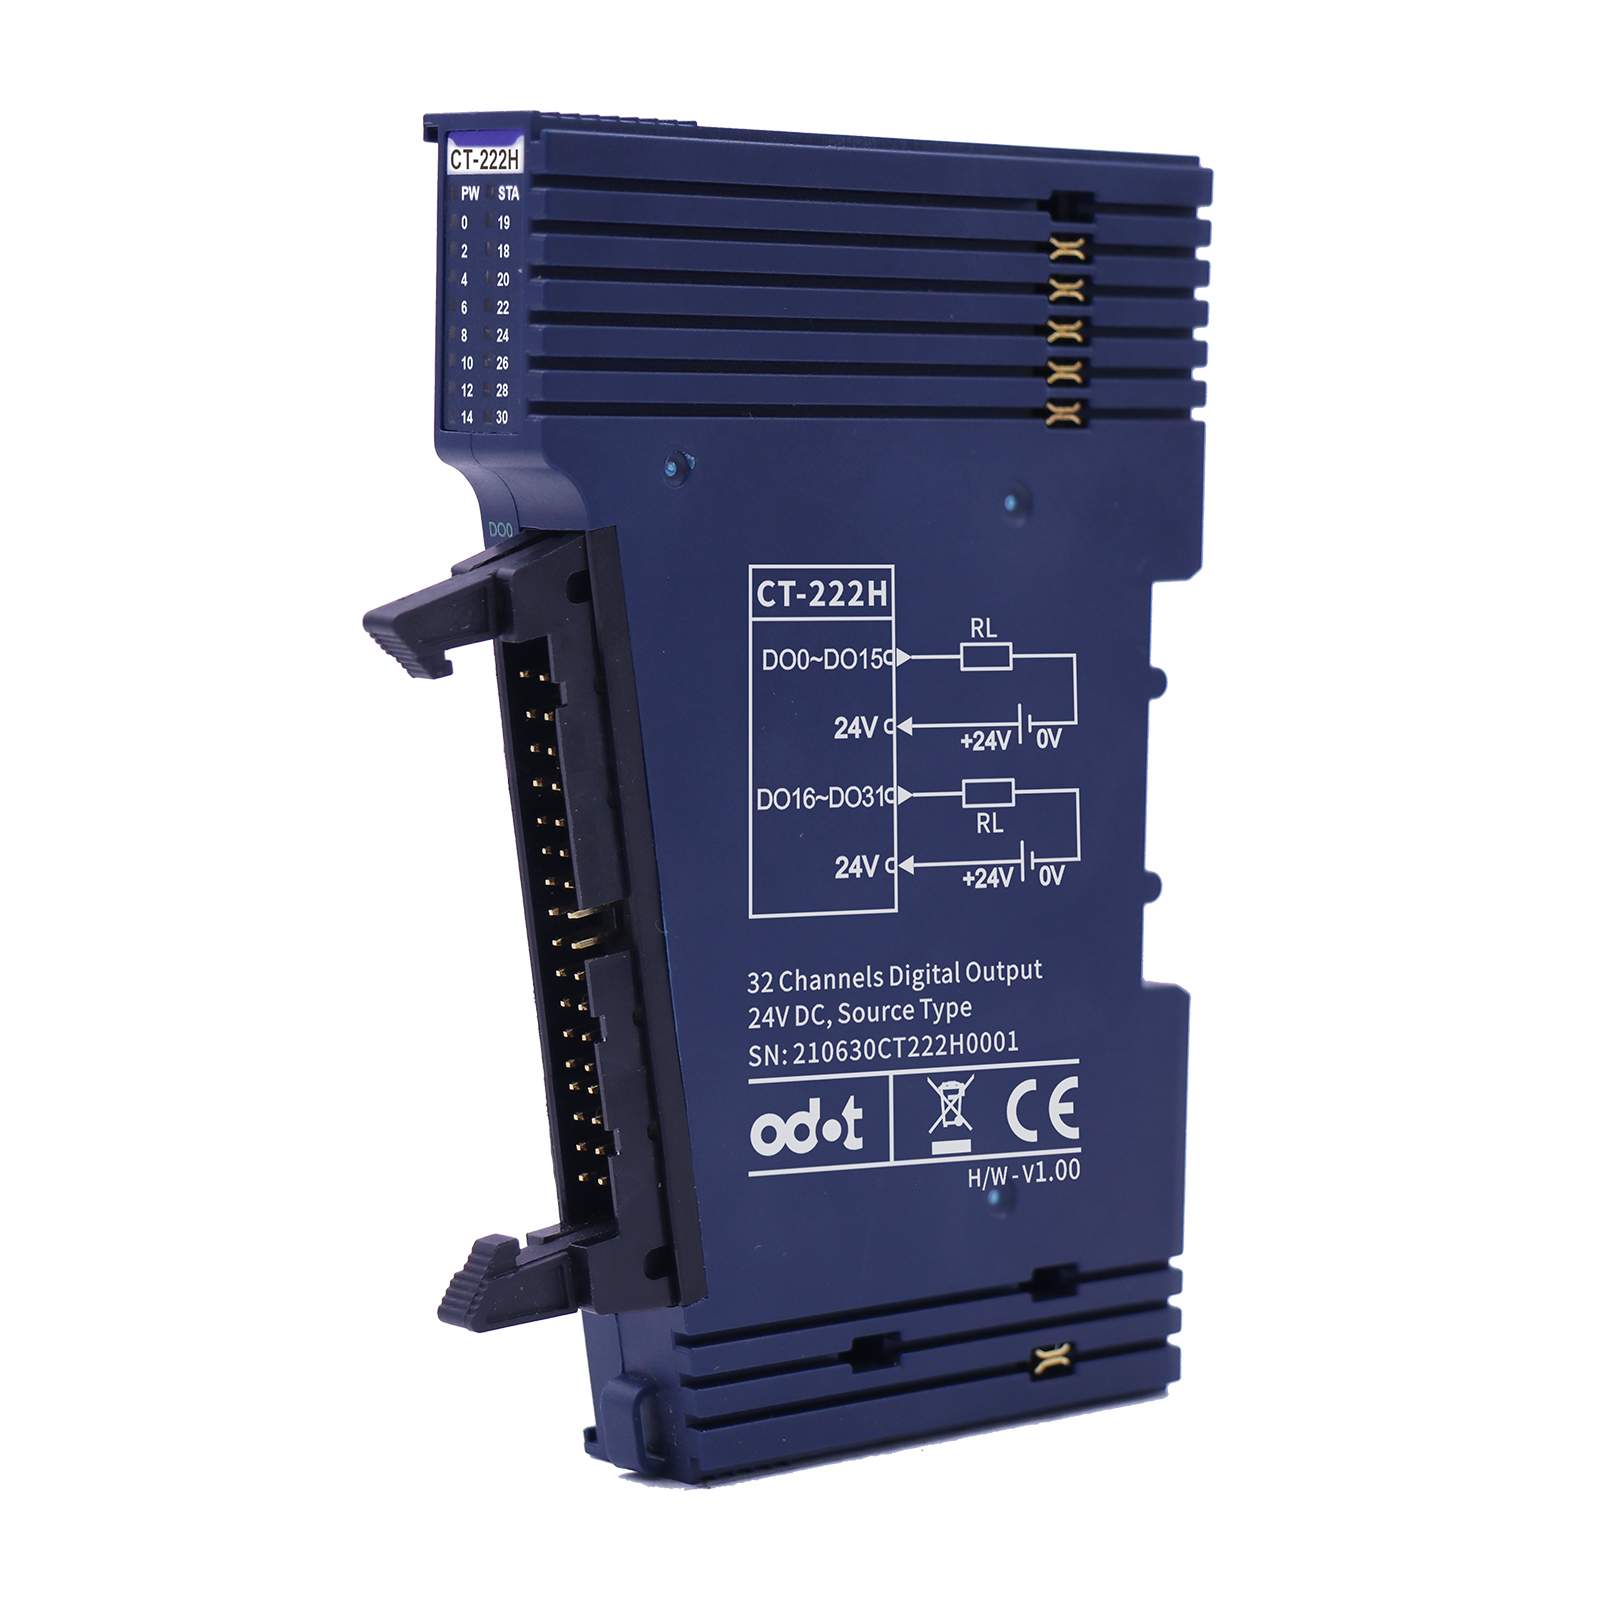 Factory Price For Profibus System - CT-222H: 32 channels digital output, source, 24Vdc/0.5A，34Pin male connector – ODOT